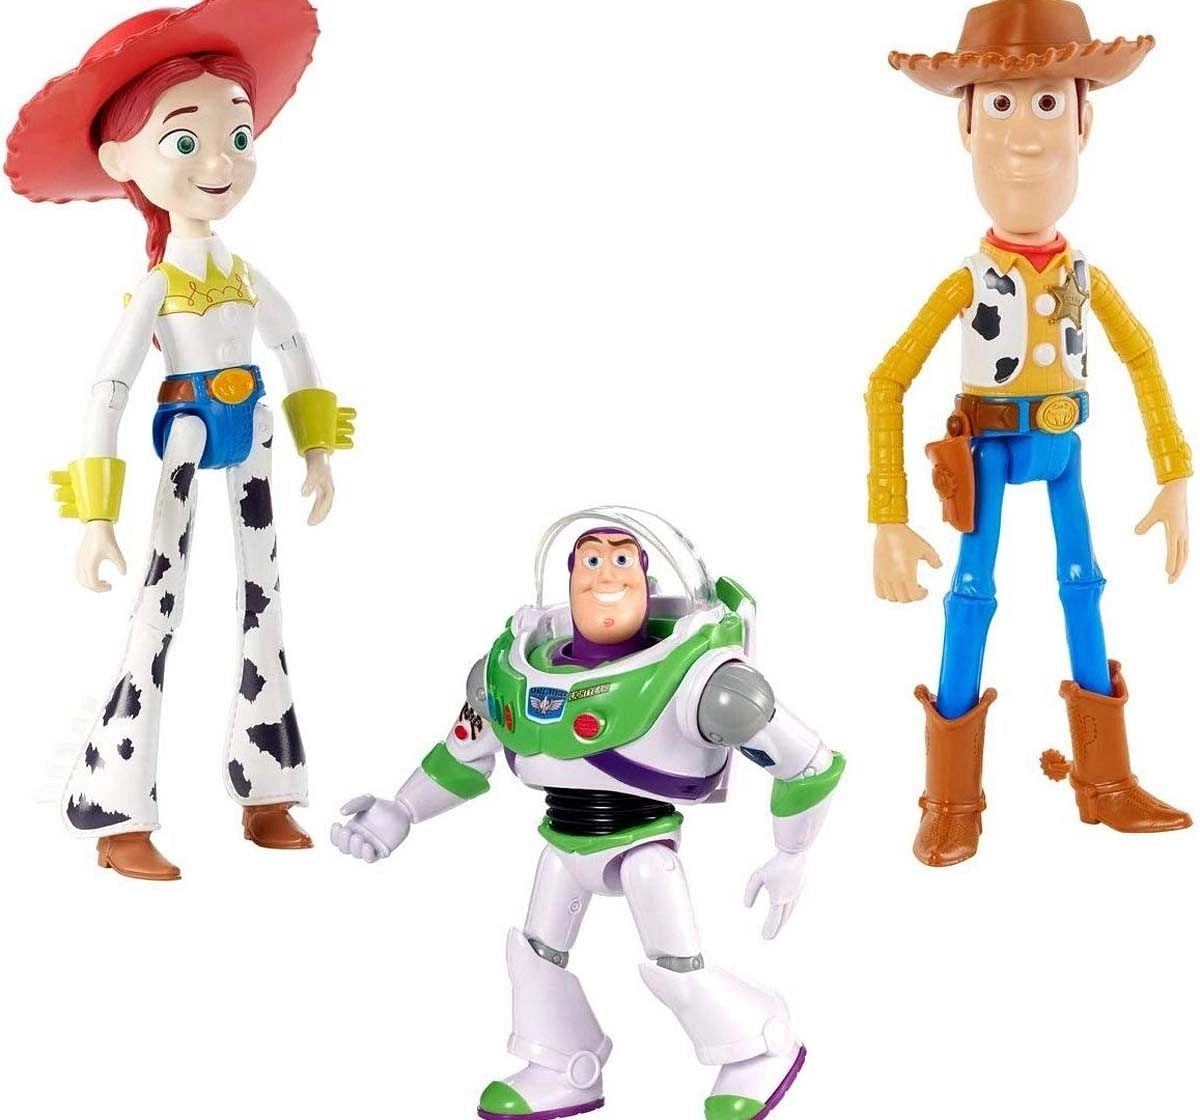 Toy Story 7" Inch Basic  Toystory4 Action Figures for Kids age 3Y+, Assorted